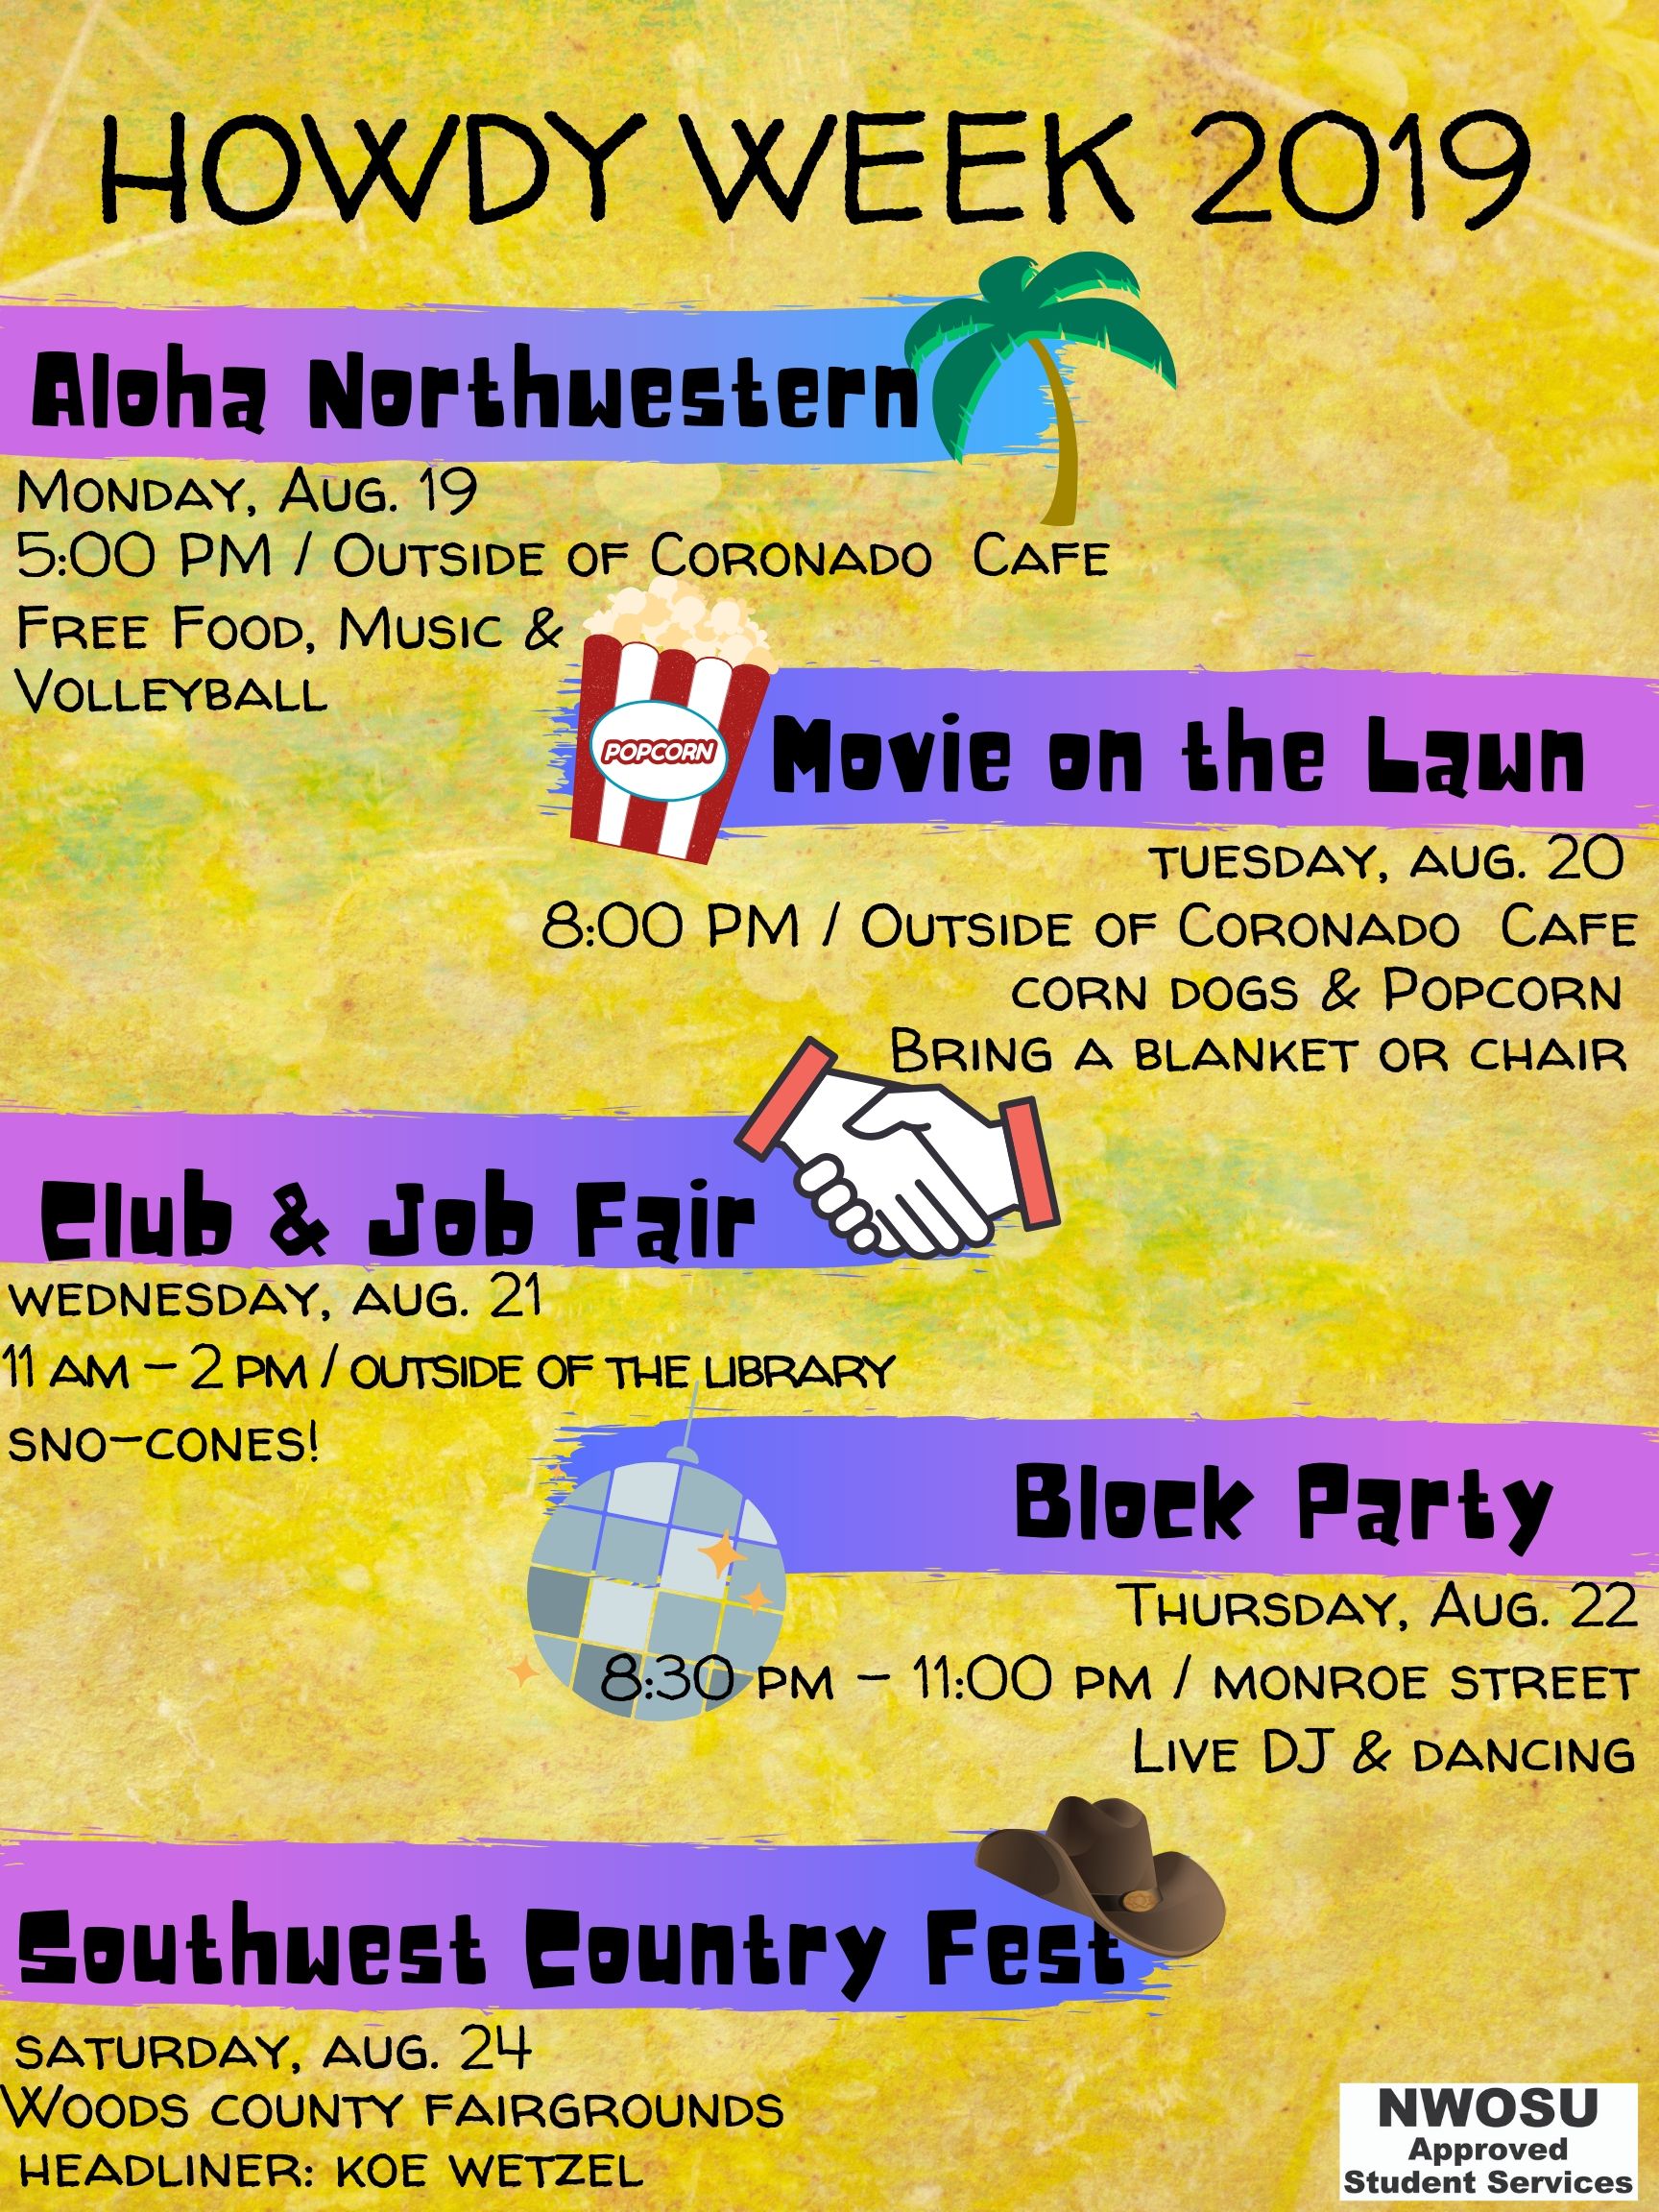 Howdy Week at Northwestern to be filled with fun events, free food for